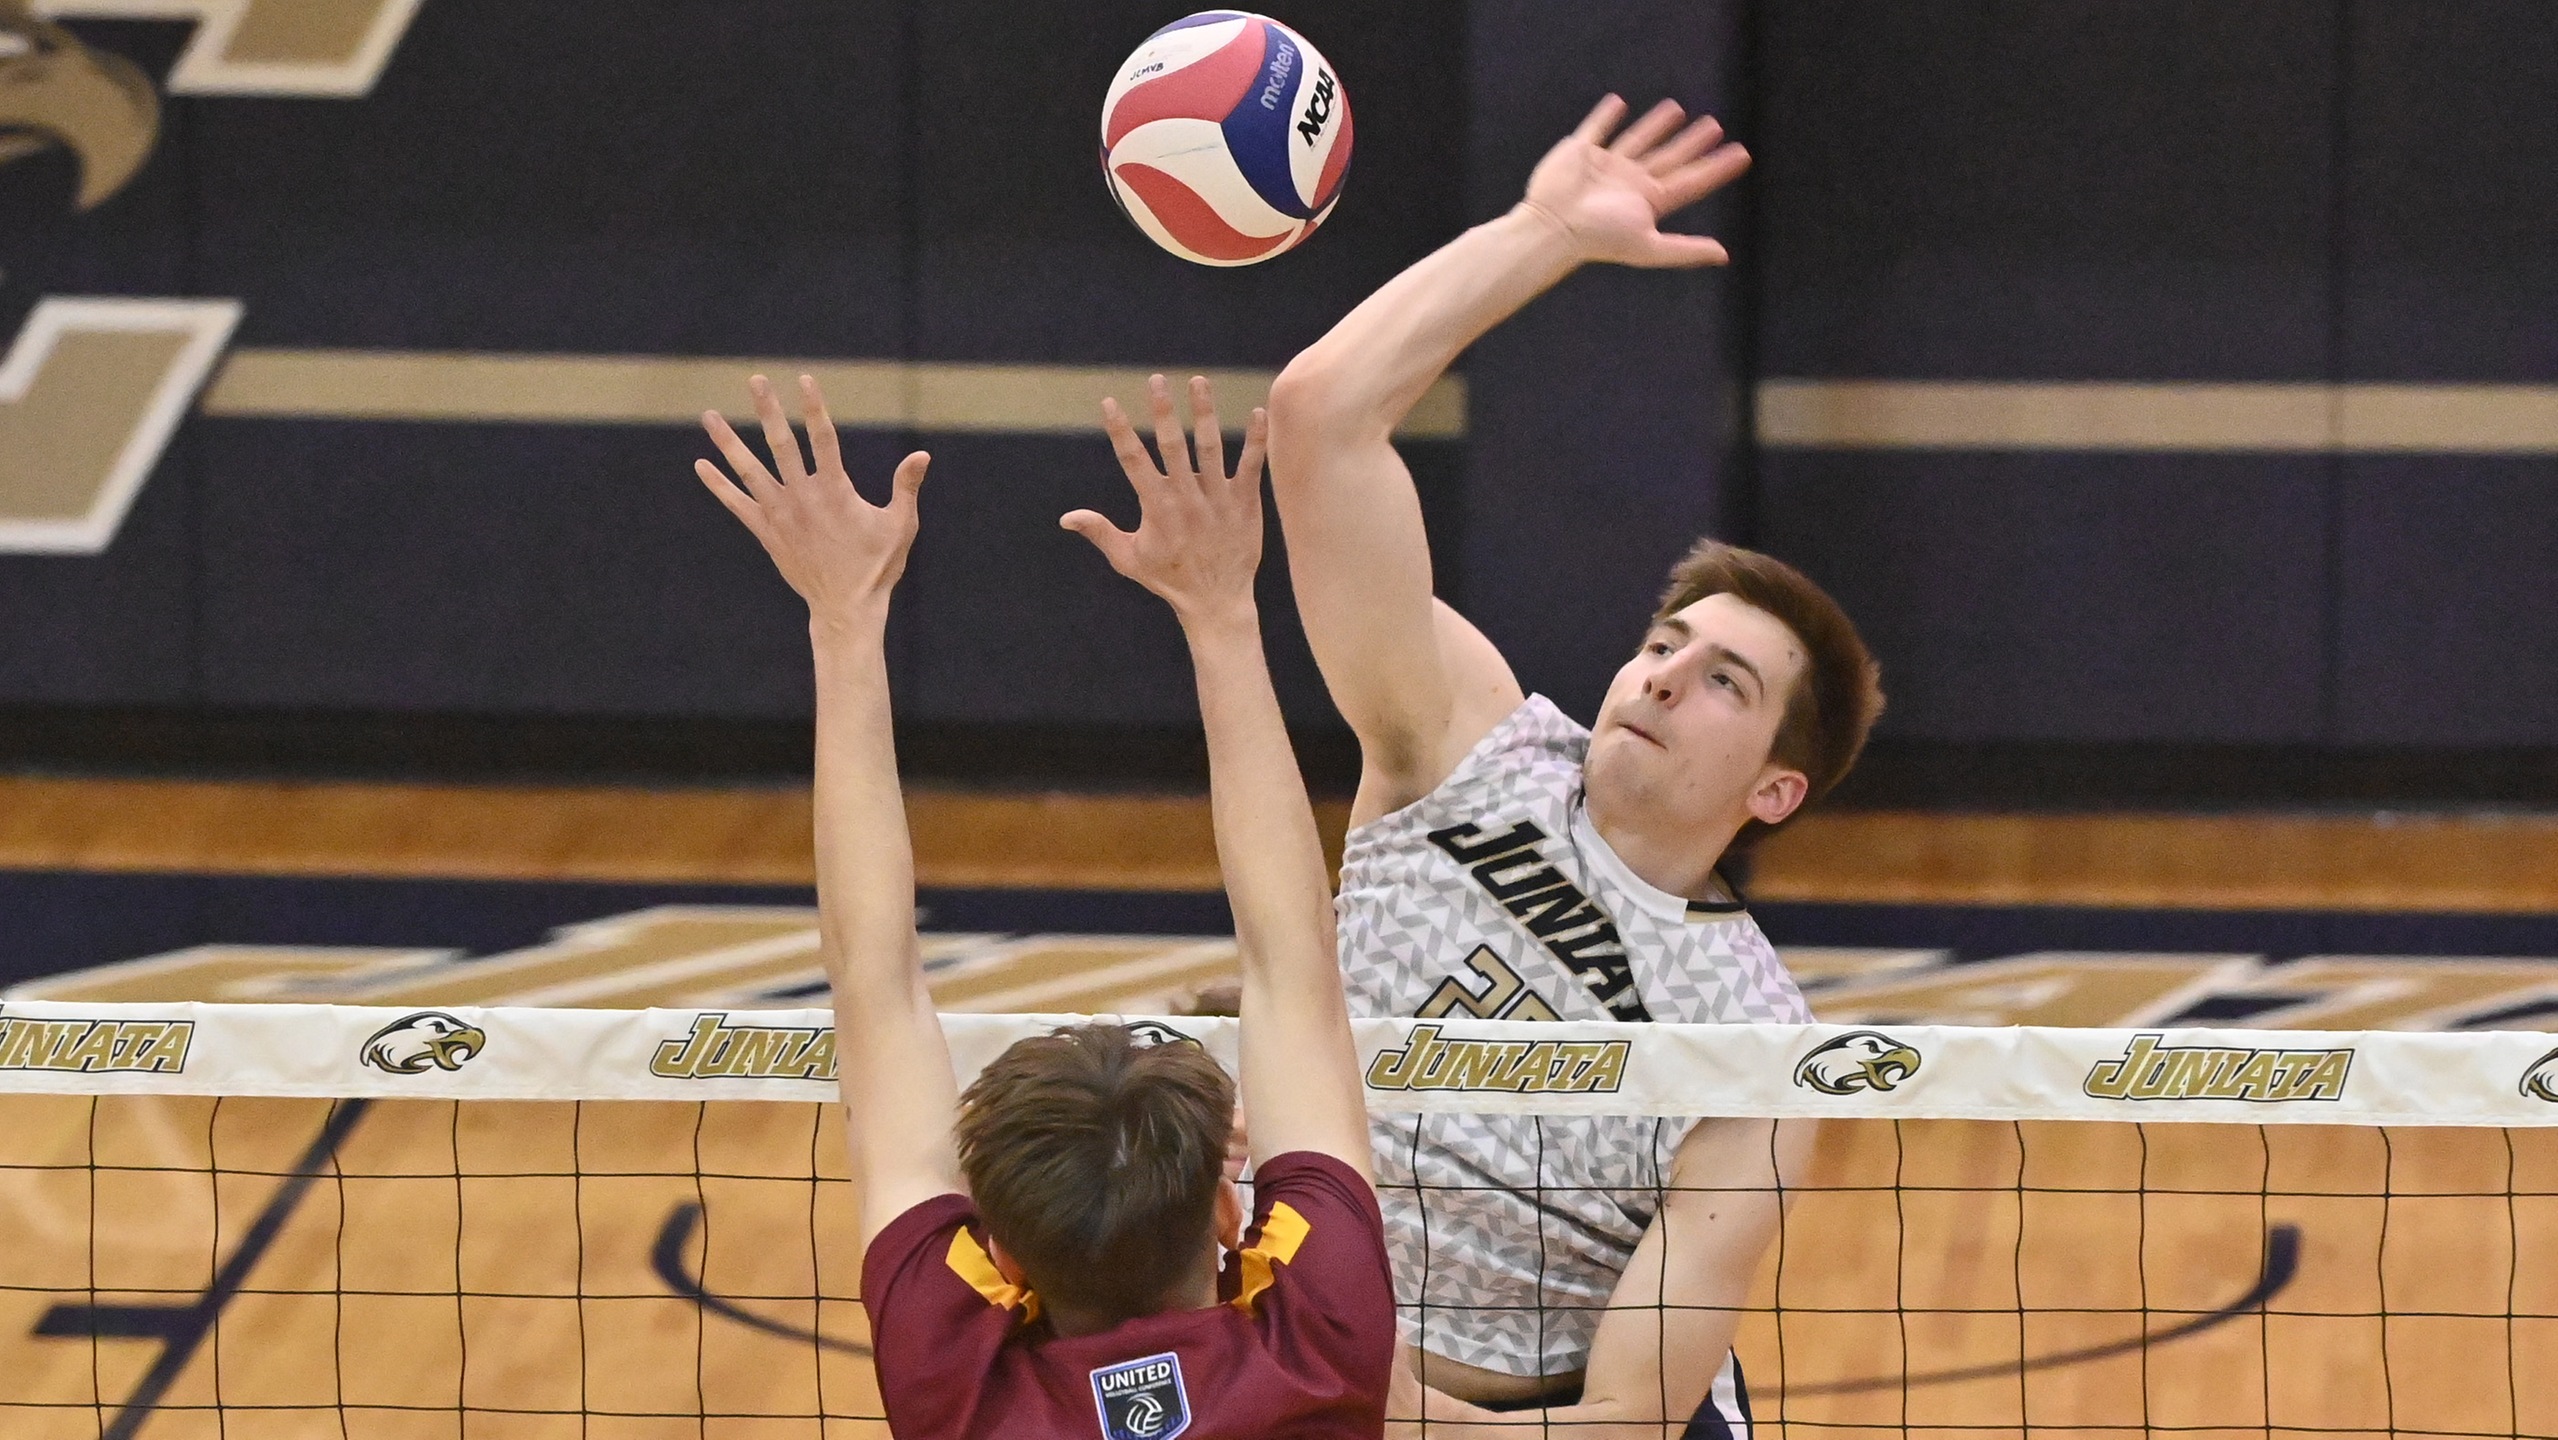 Men's Volleyball Drops First Game of Season to SVU, Recovers in Win Over Blue Jays